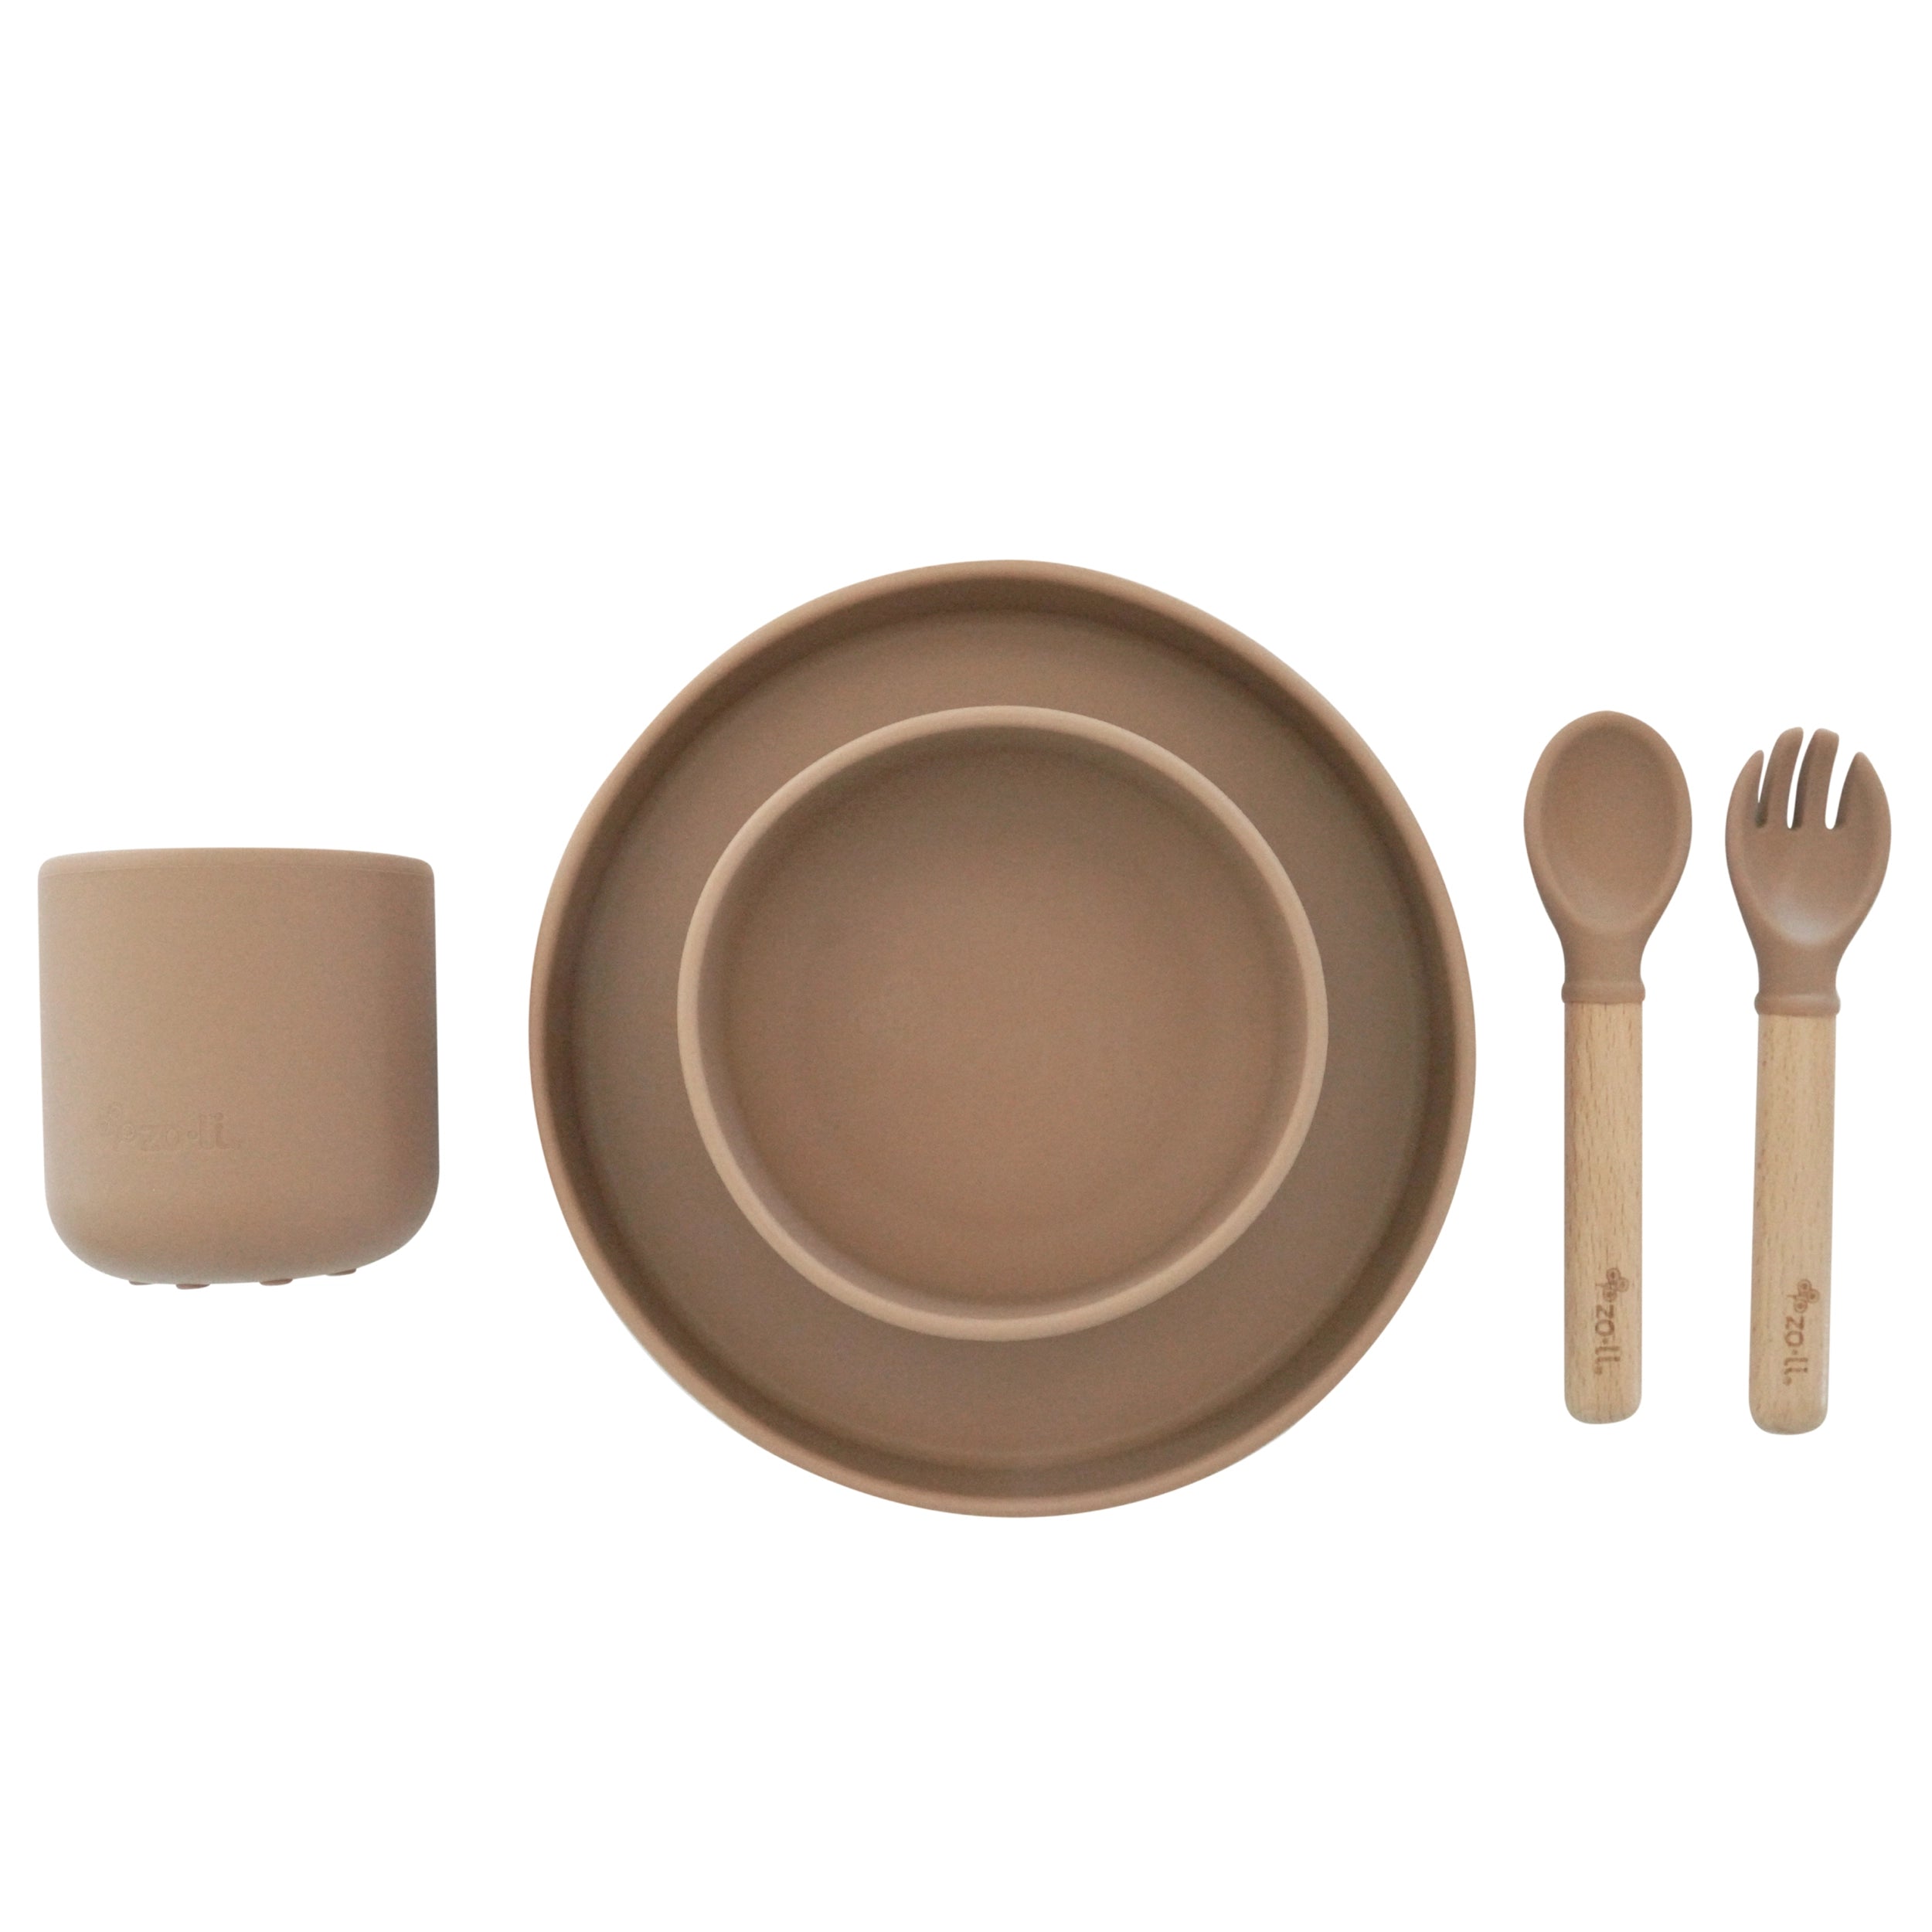 Giftable Silicone Toddler Tableware Set